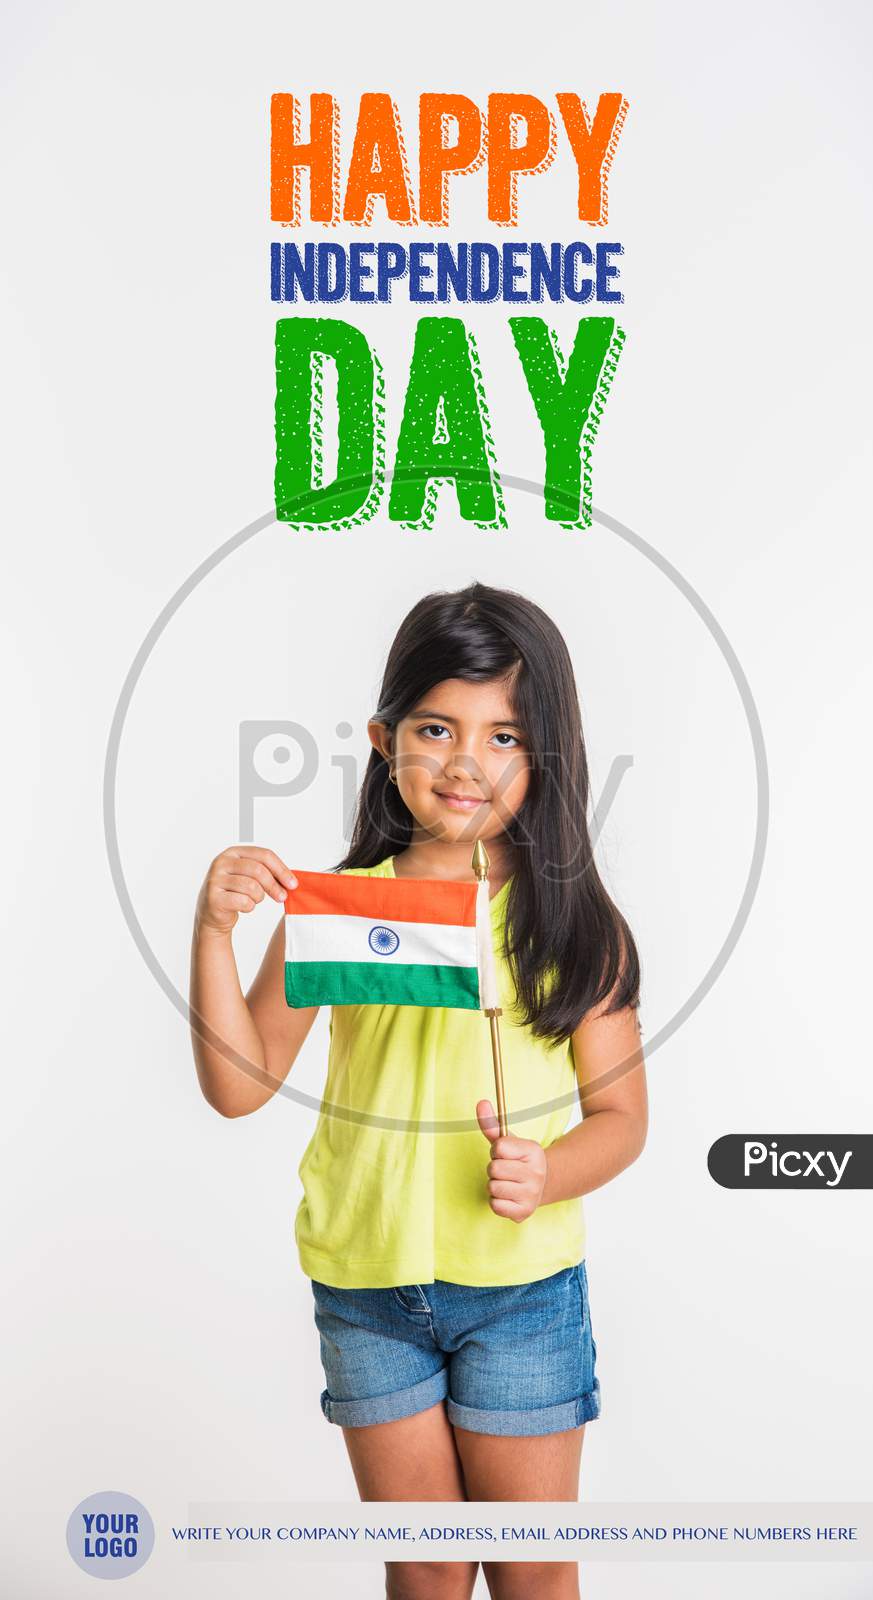 Cute Girl holding Indian flag or tricolour